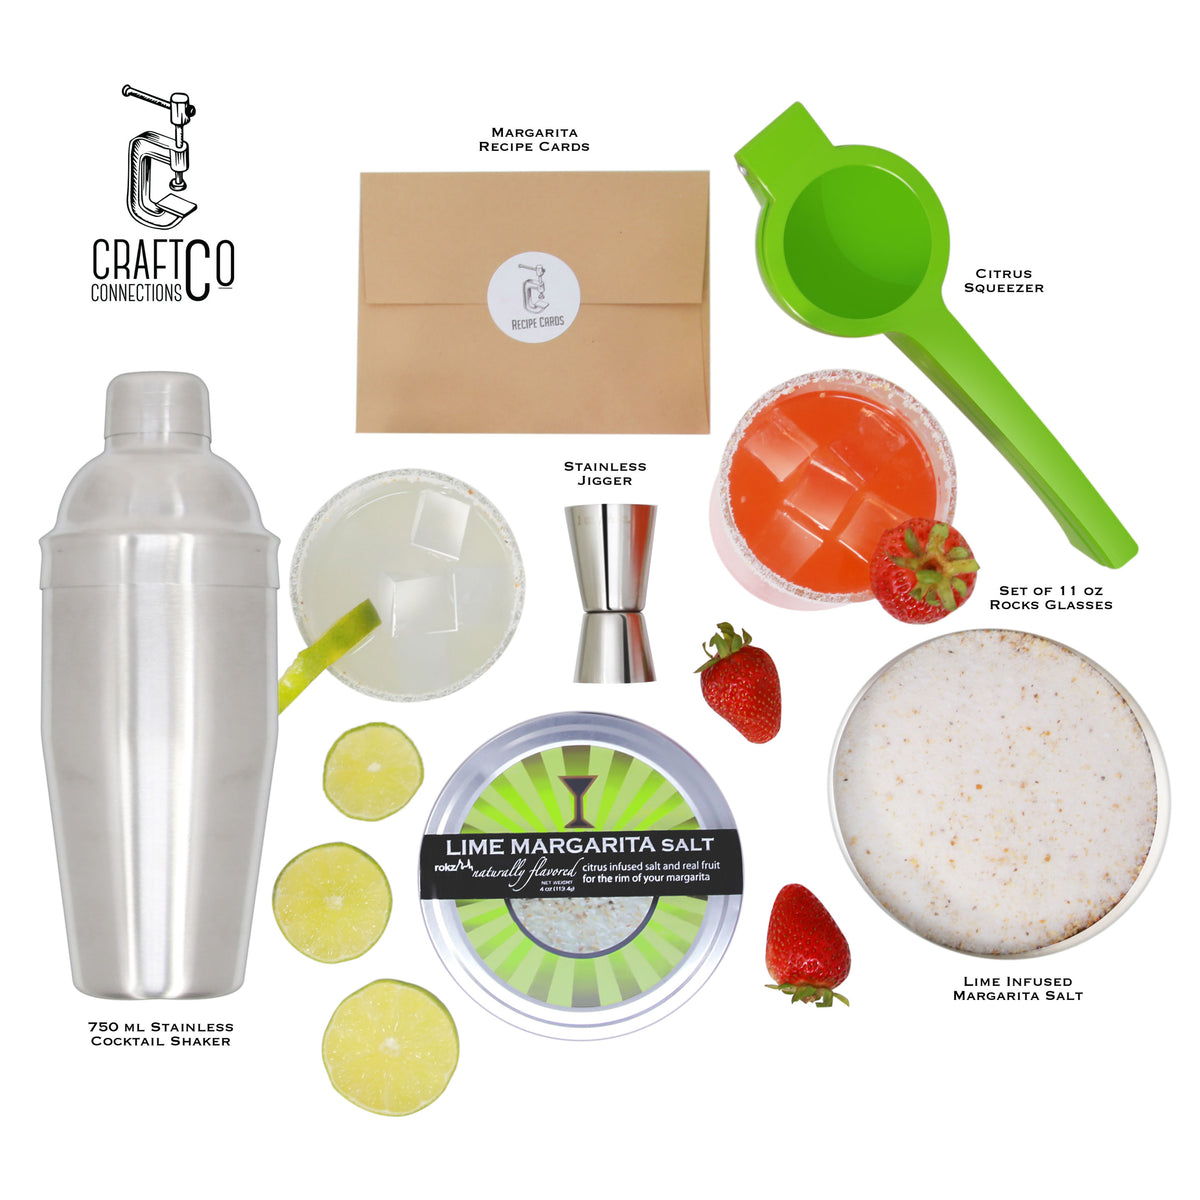 Margarita Cocktail Kit - Just Add Tequila!